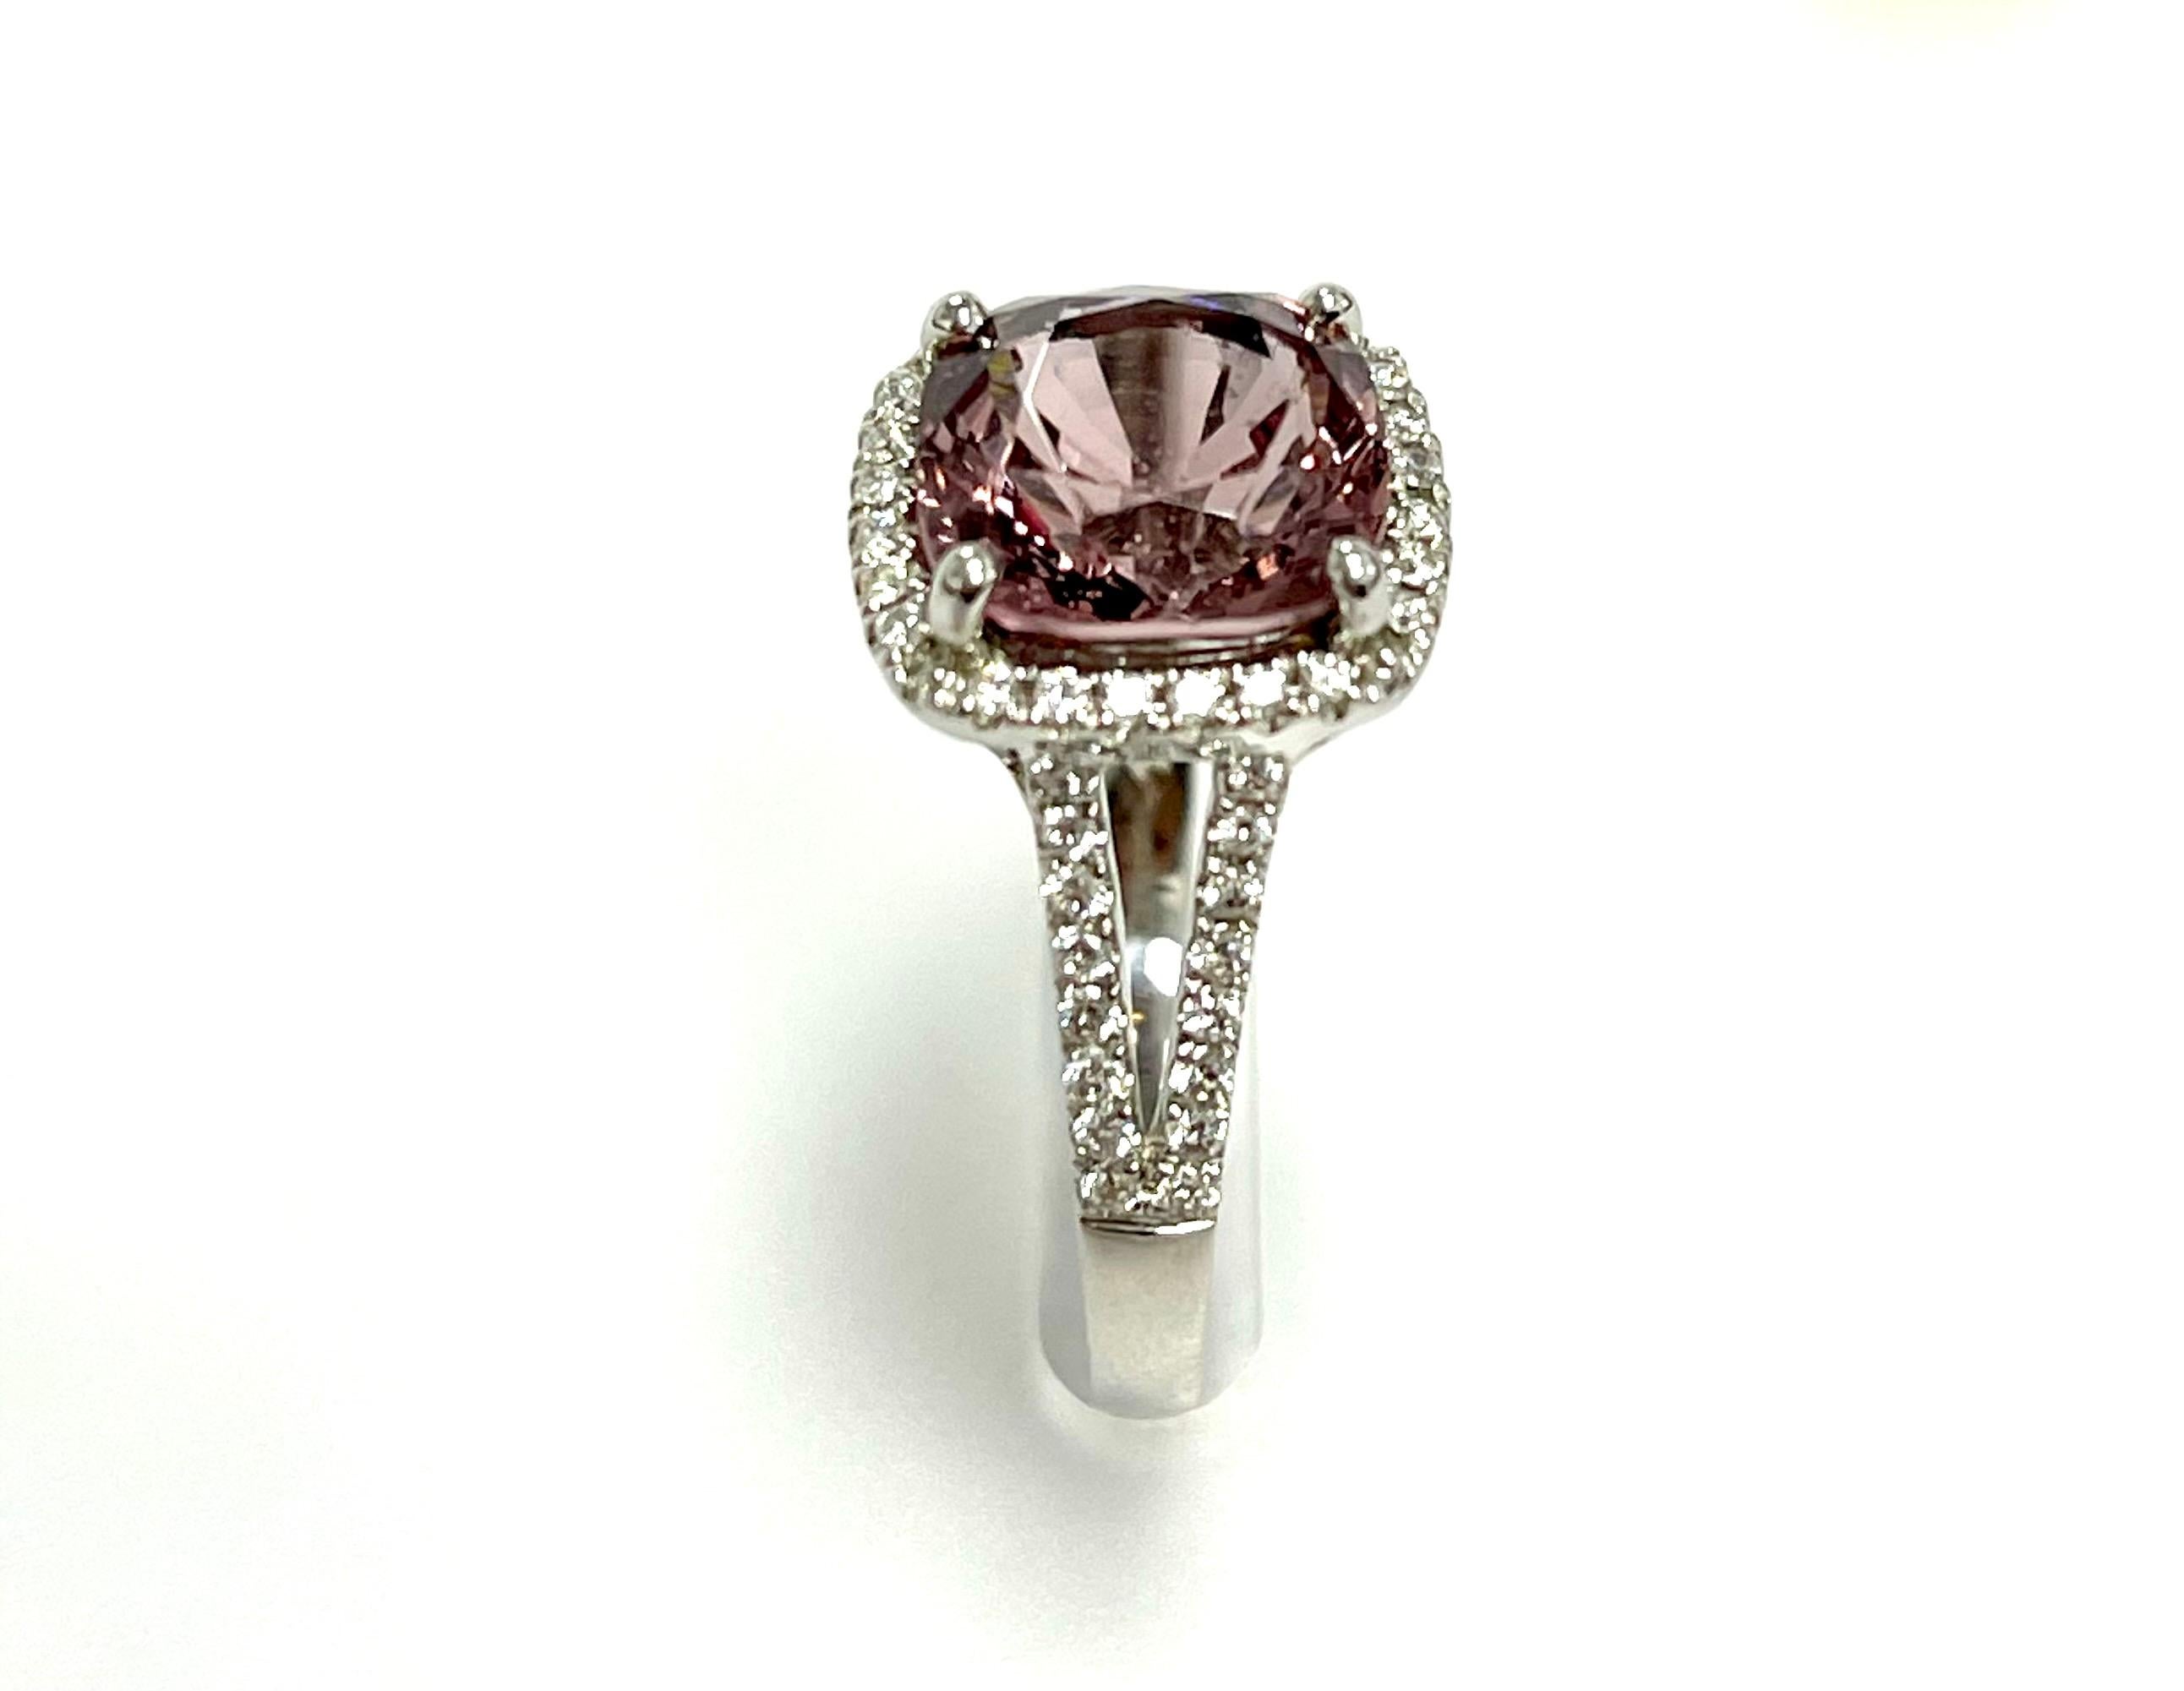 Antique Cushion Cut 4.28 Carat Spinel Diamond Cocktail Ring For Sale